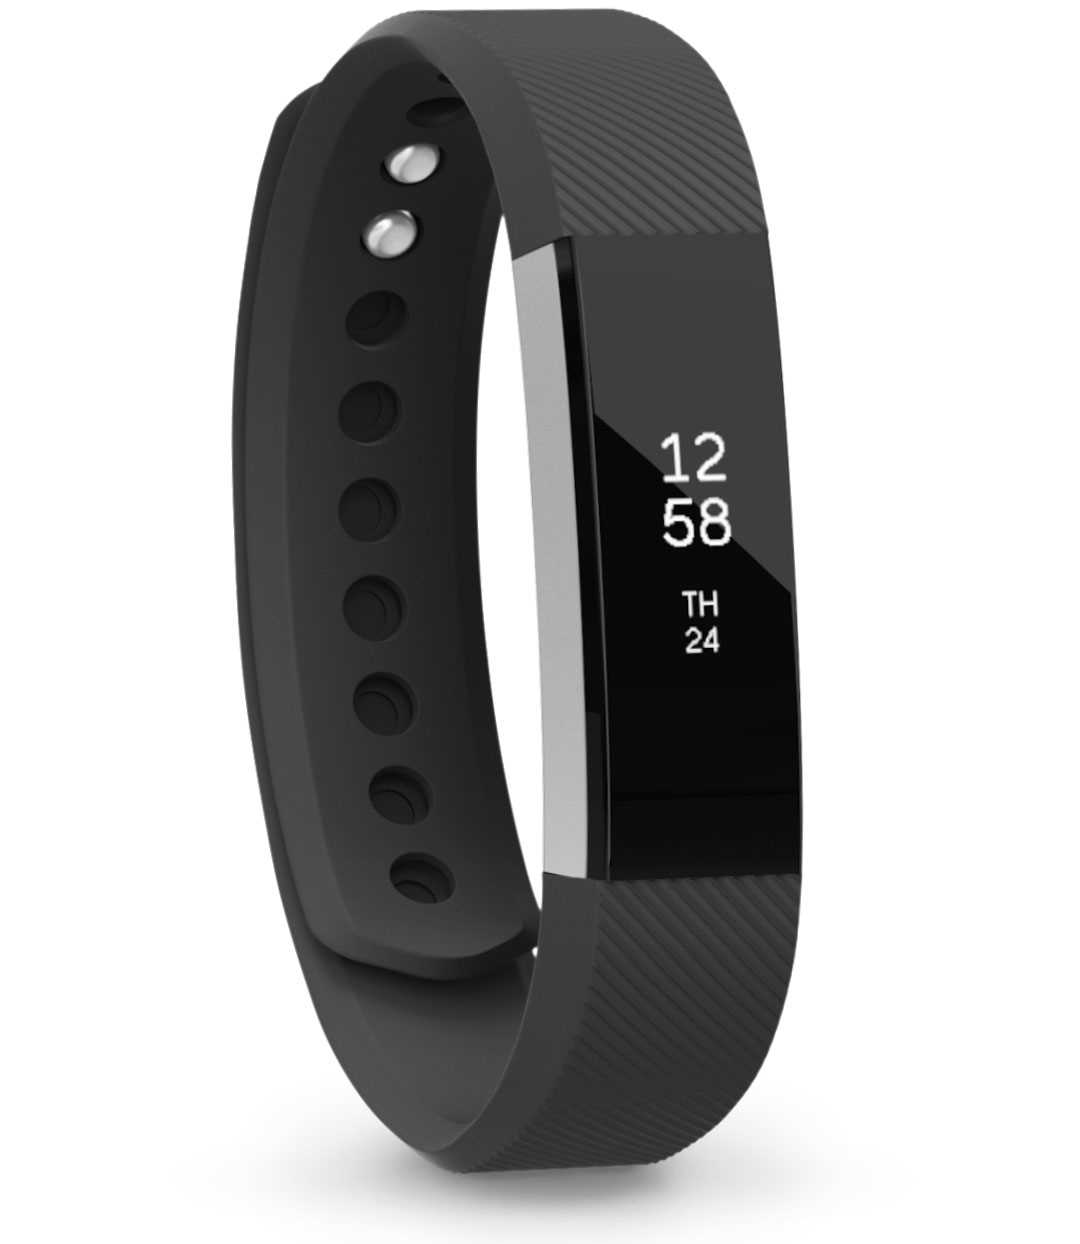 How to Charge a Fitbit A Step-by-Step Guide